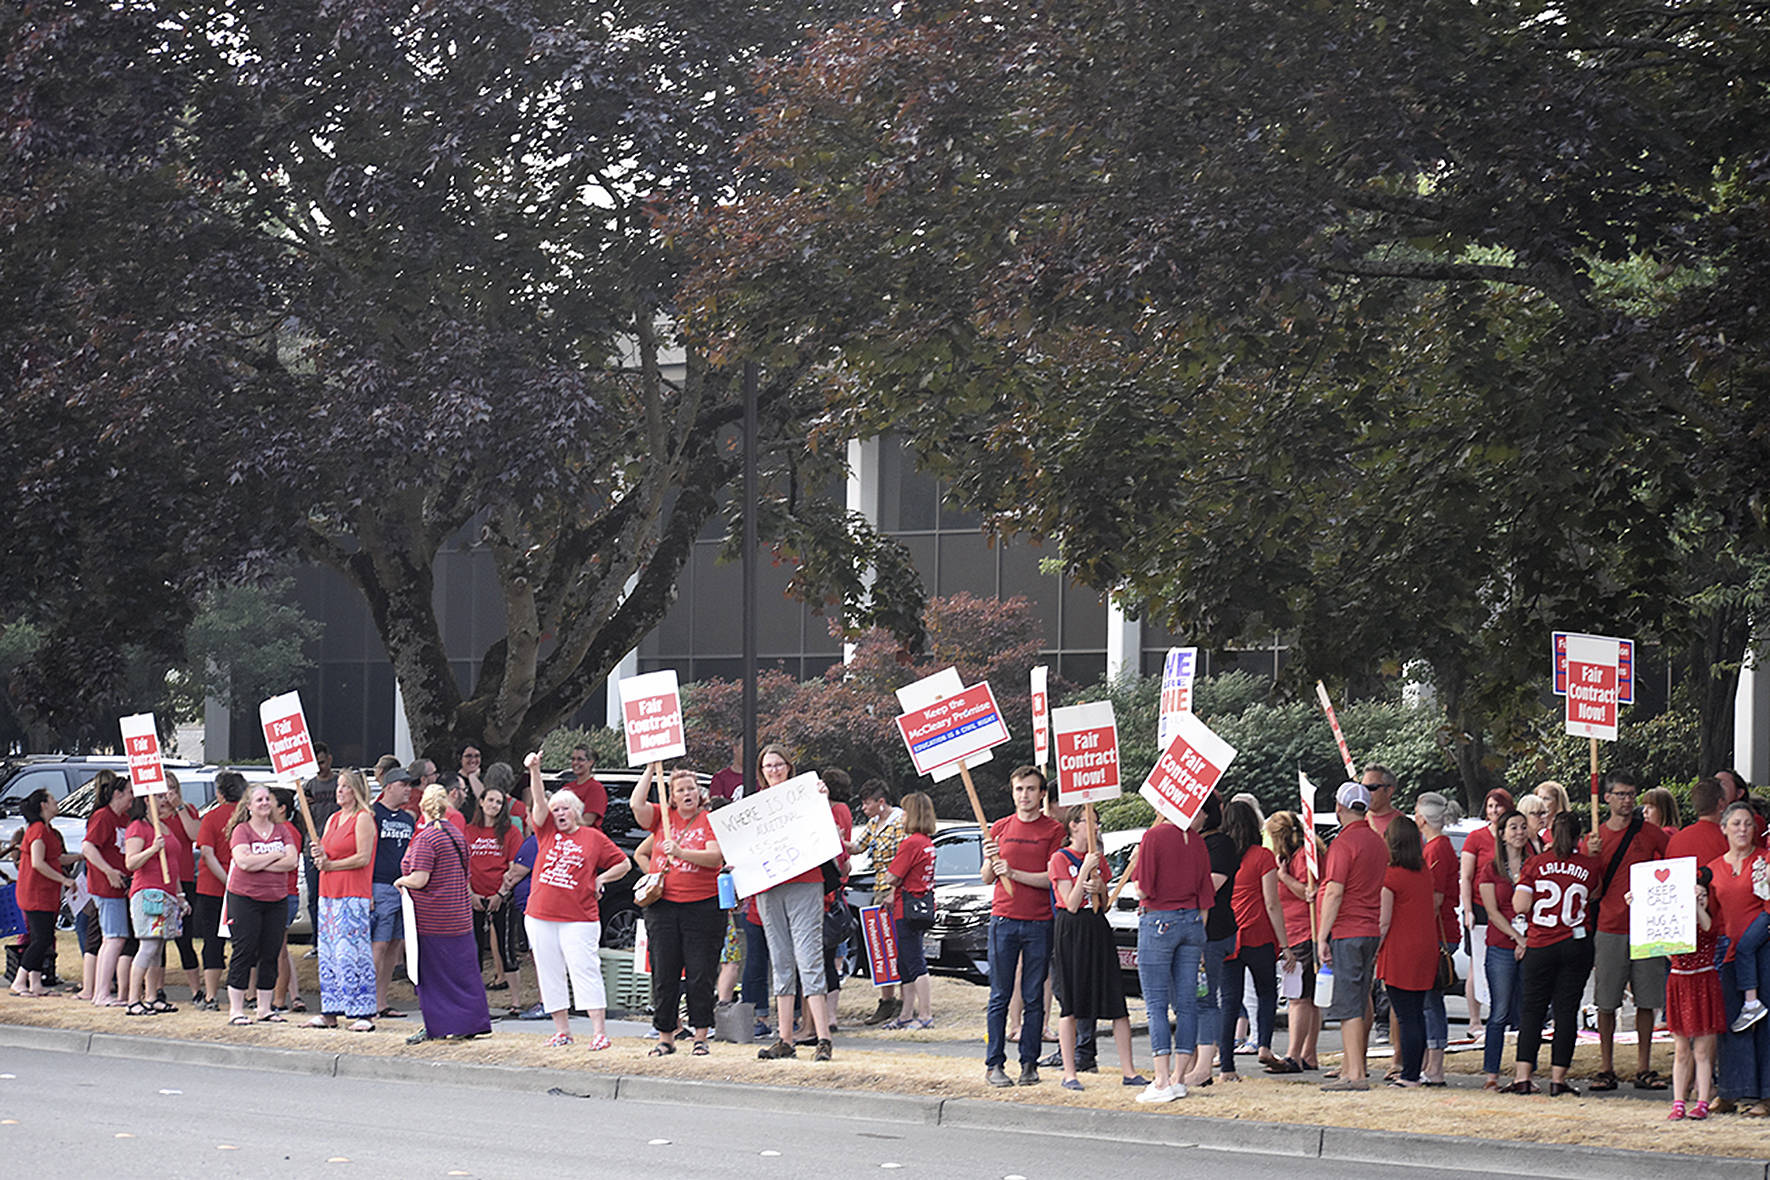 Photo by Haley Ausbun. August 2018, when several district unions, including Renton Education Association, bargained for new salaries in response to the McCleary decision.